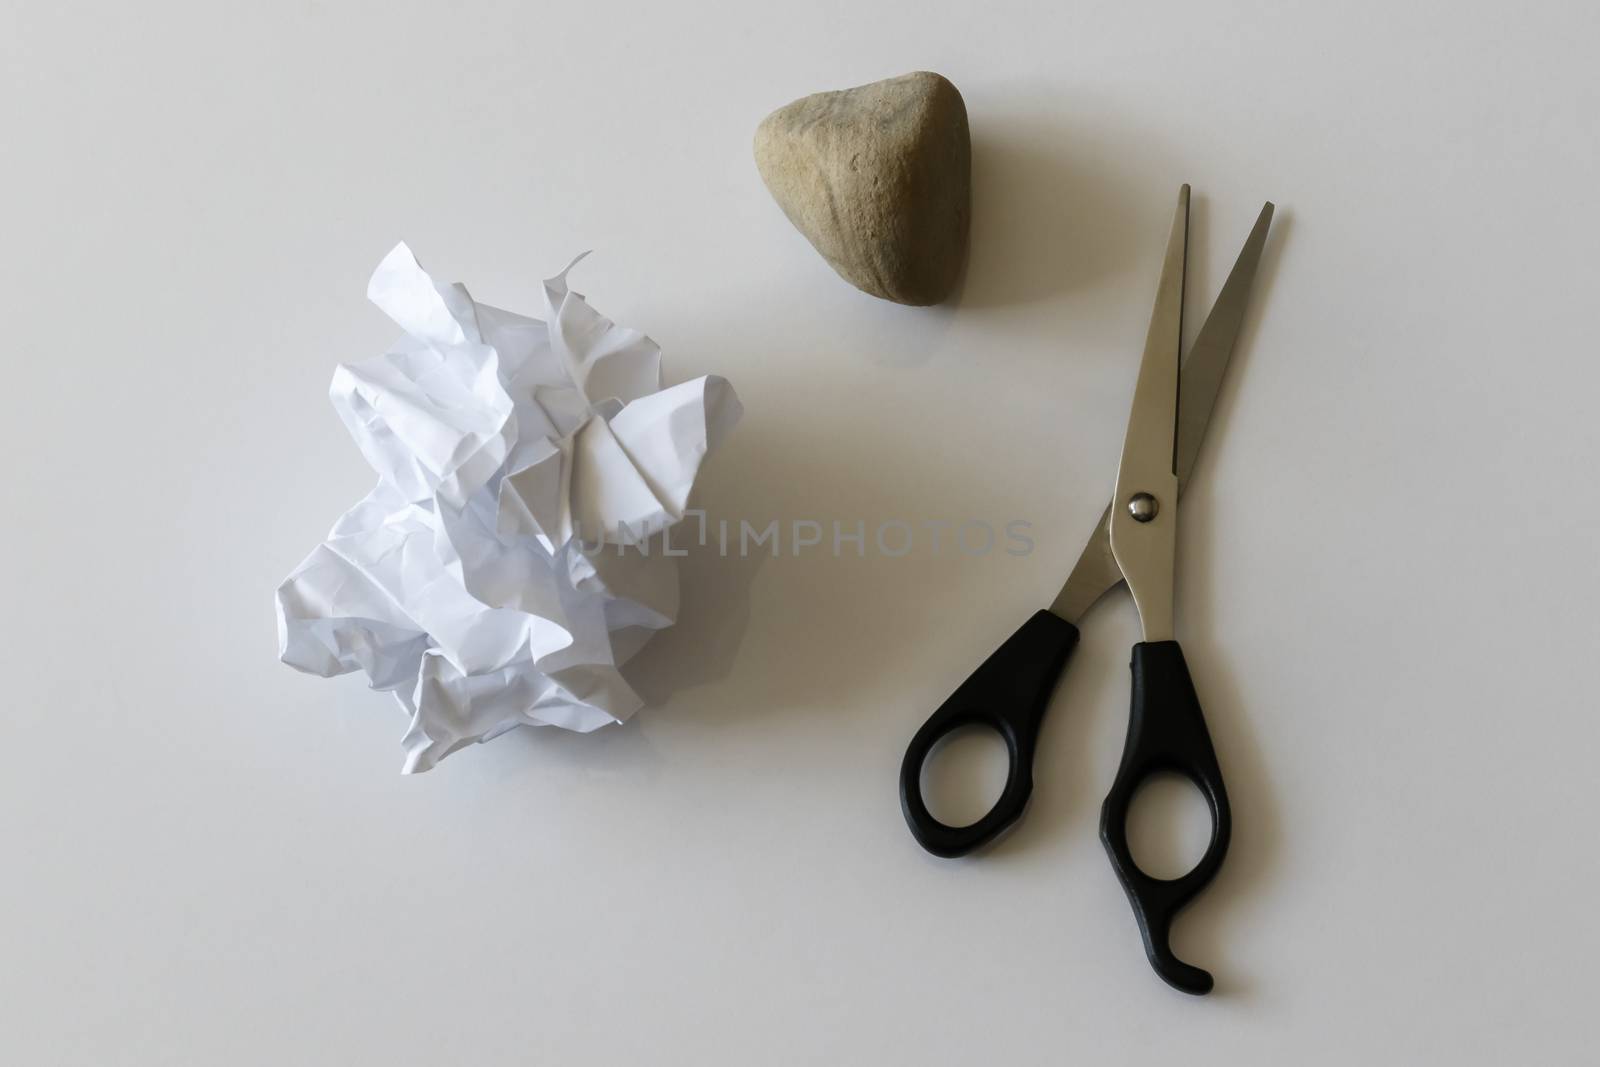 The objects for the classic game: stone, paper, scissors